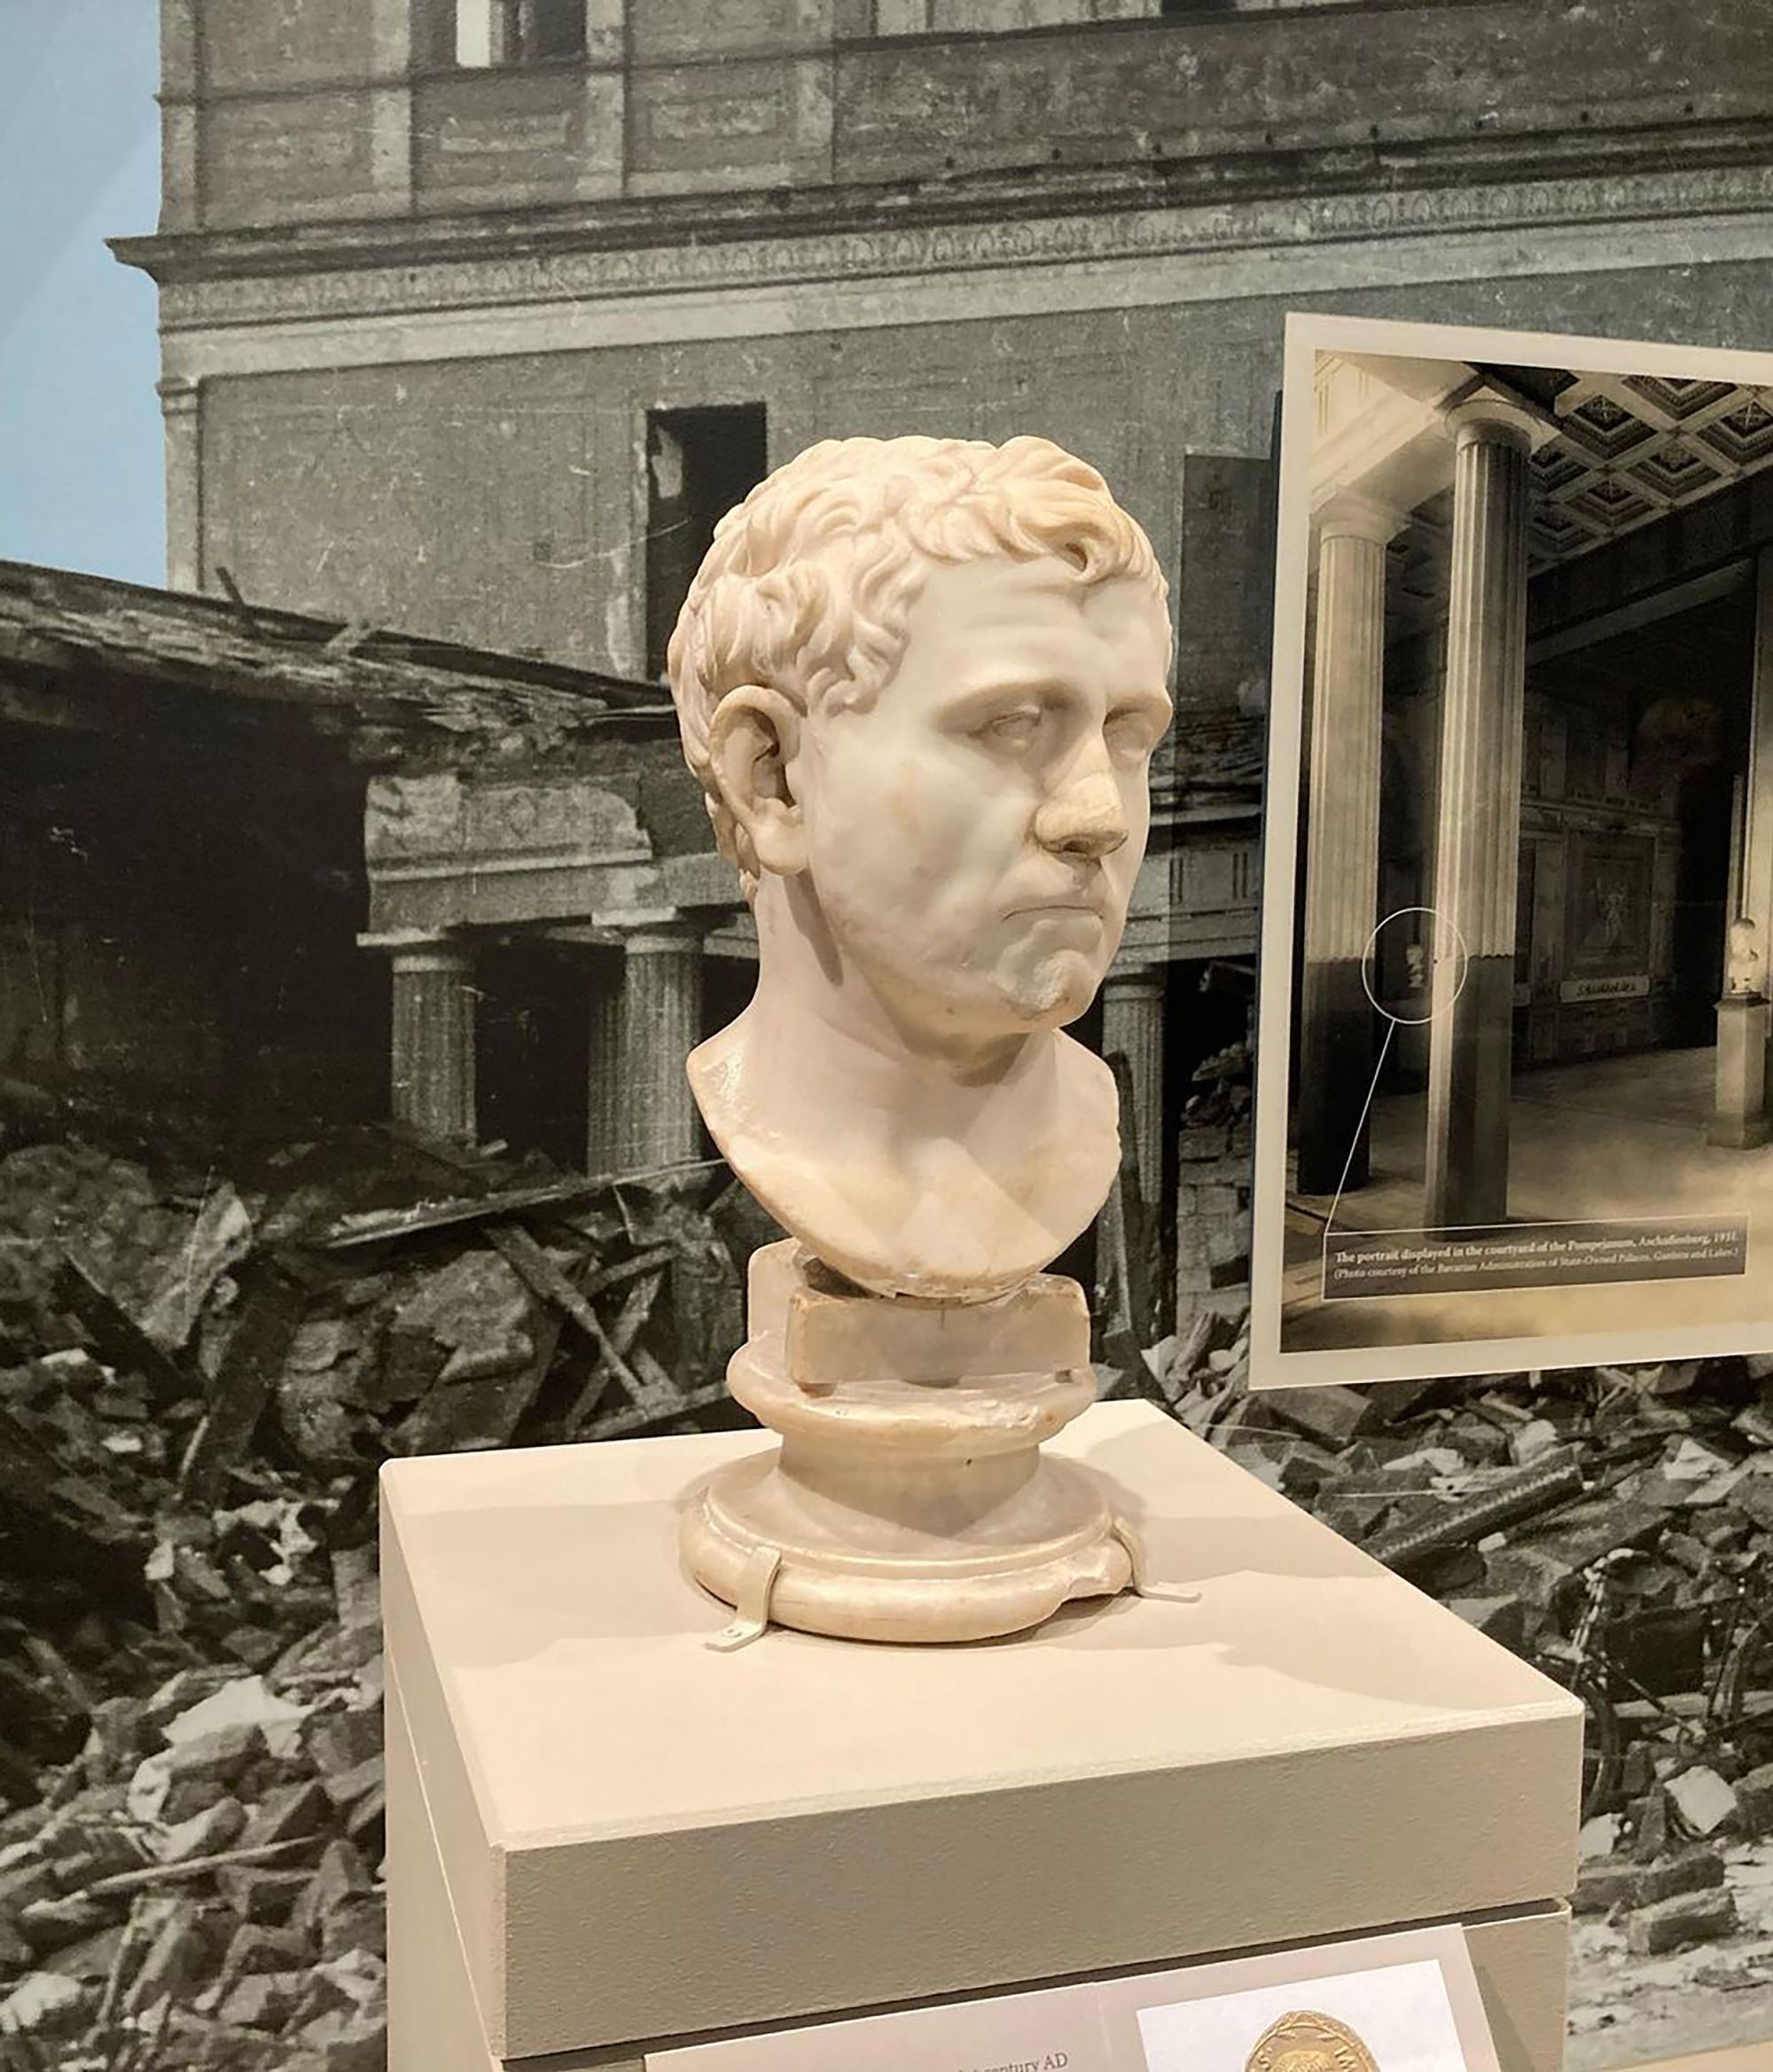 An ancient Roman bust purchased for $34.99 at Texas Goodwill is headed back  to Germany